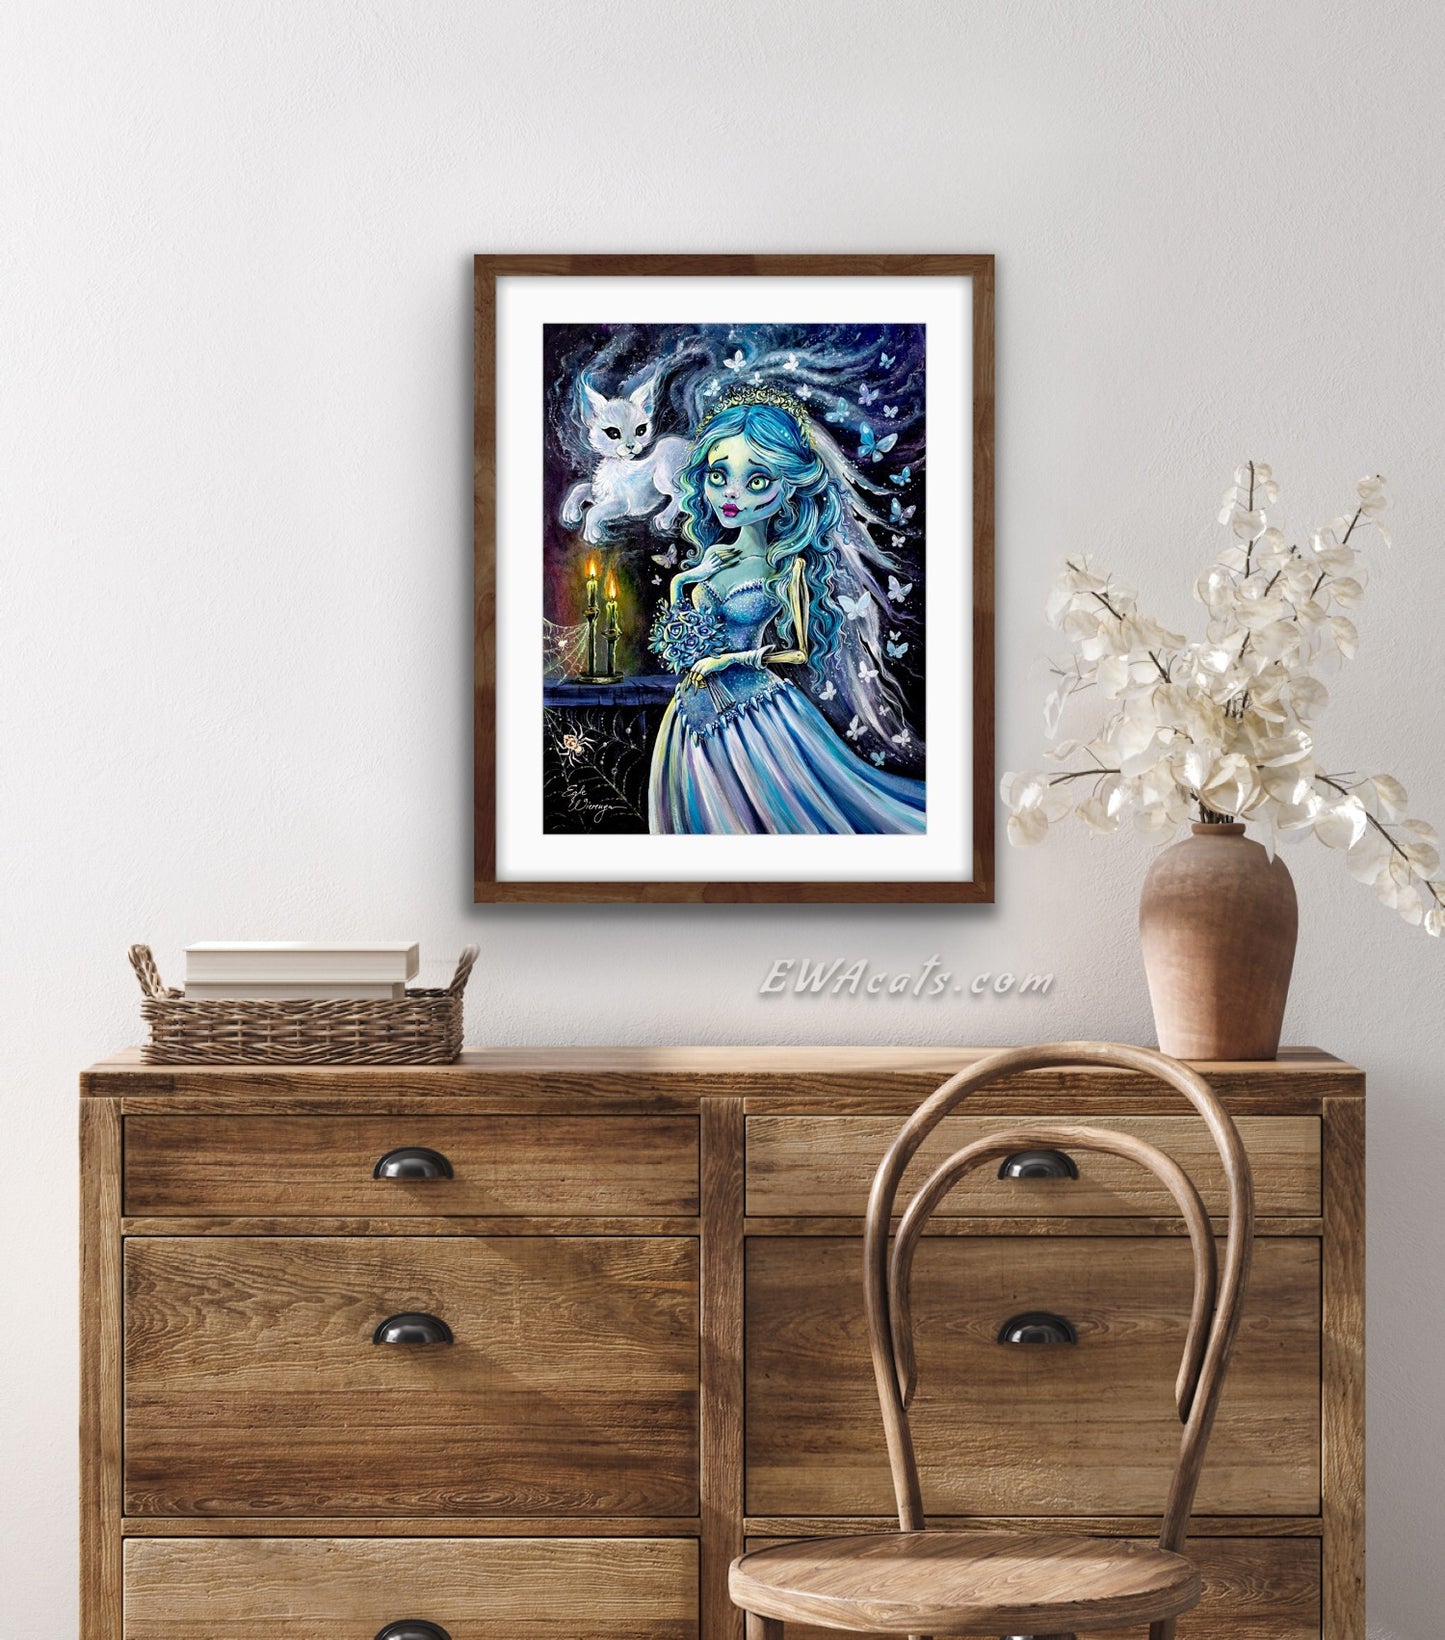 Art Print "Emily and Her Ghost Kitty"